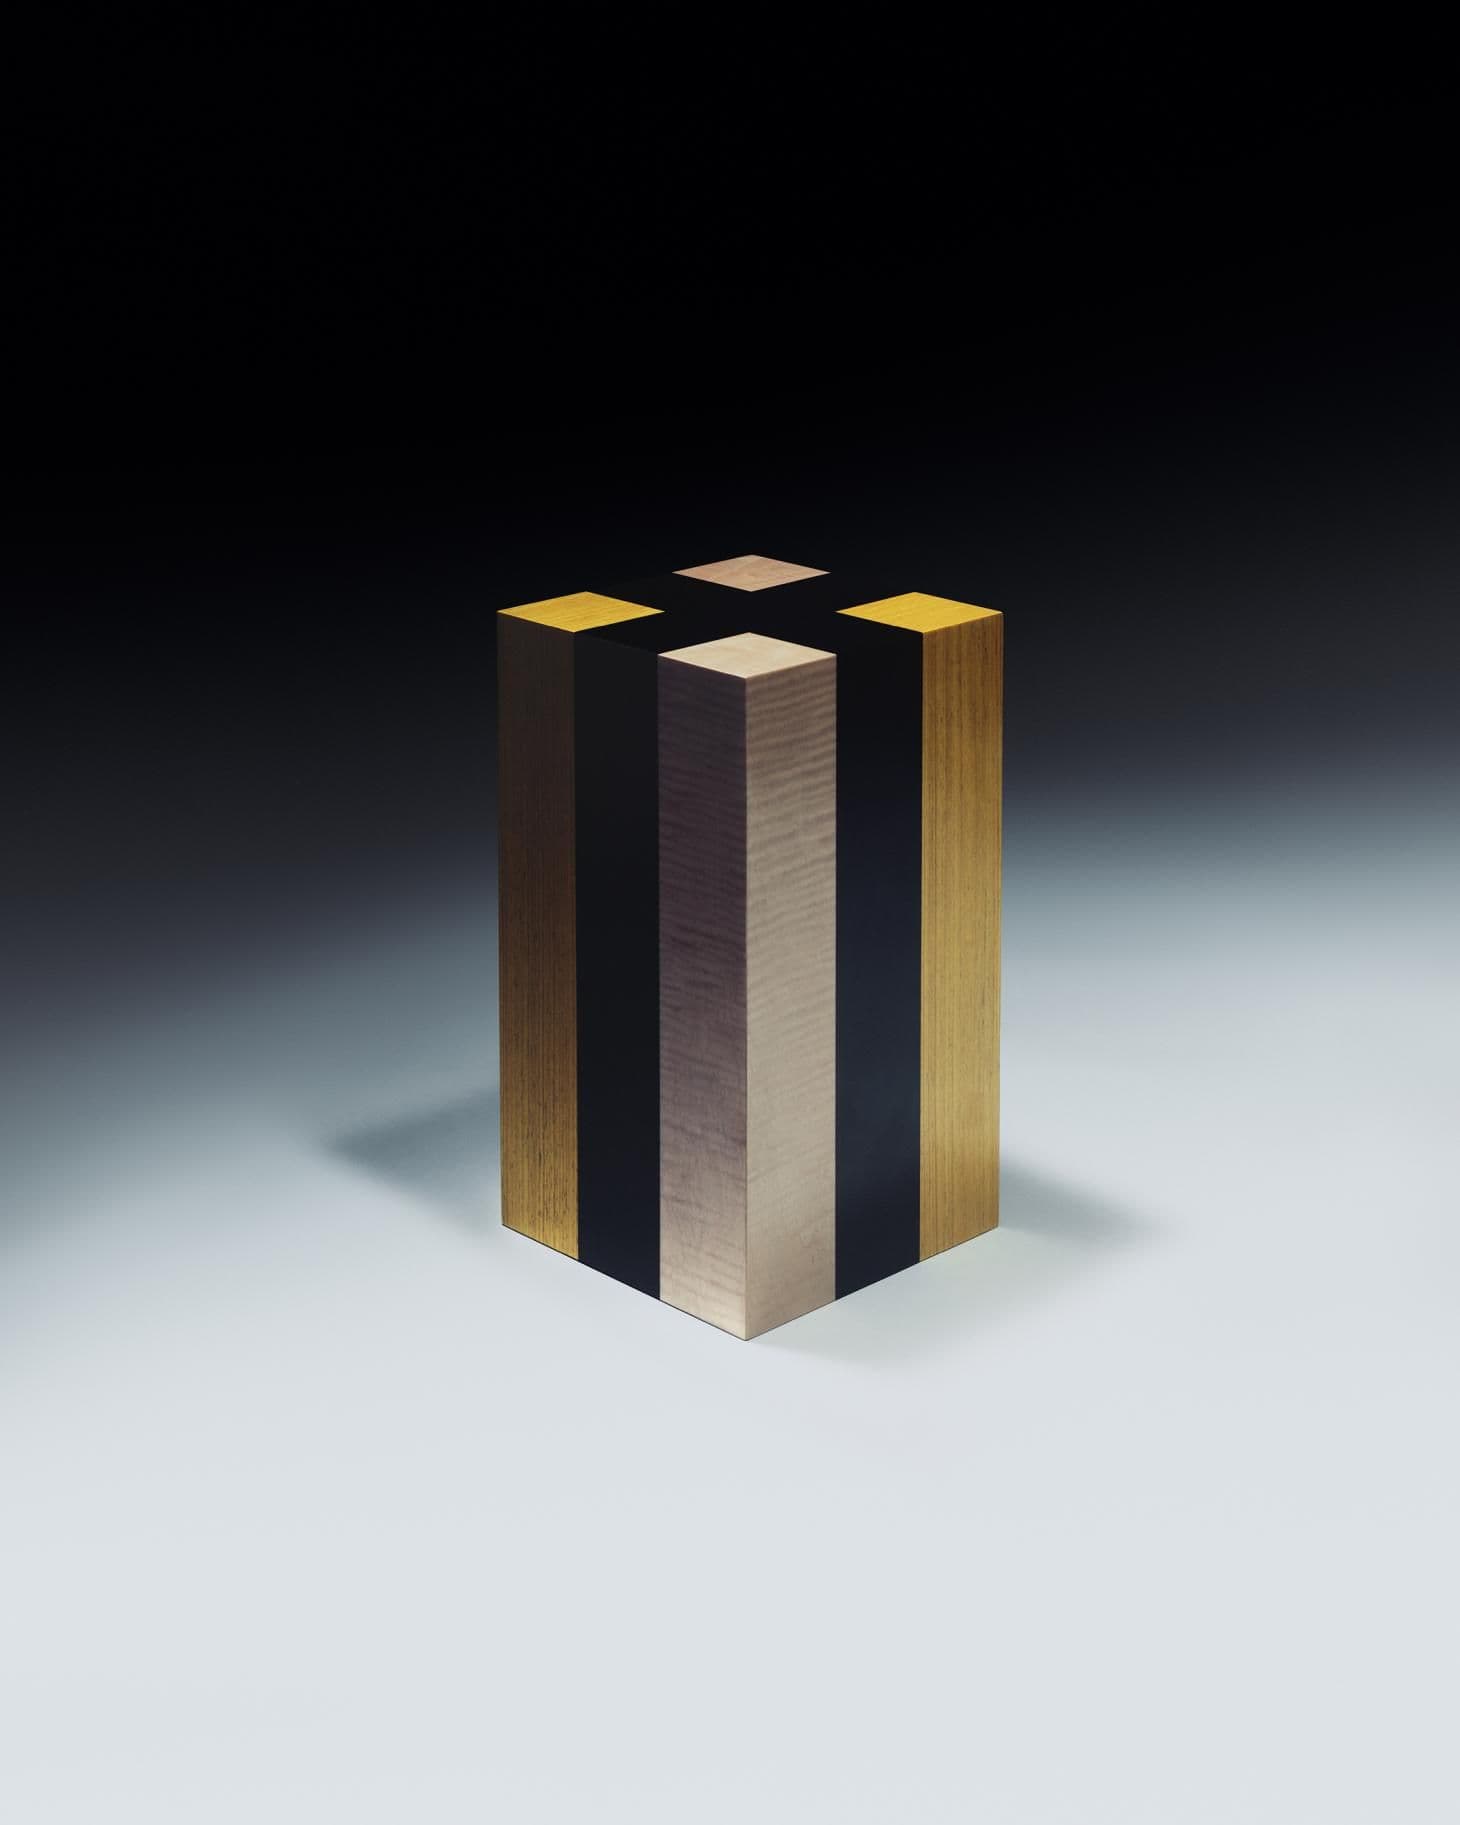 A golden steel stool featured in Jonathan Saunders' debut furniture collection. 